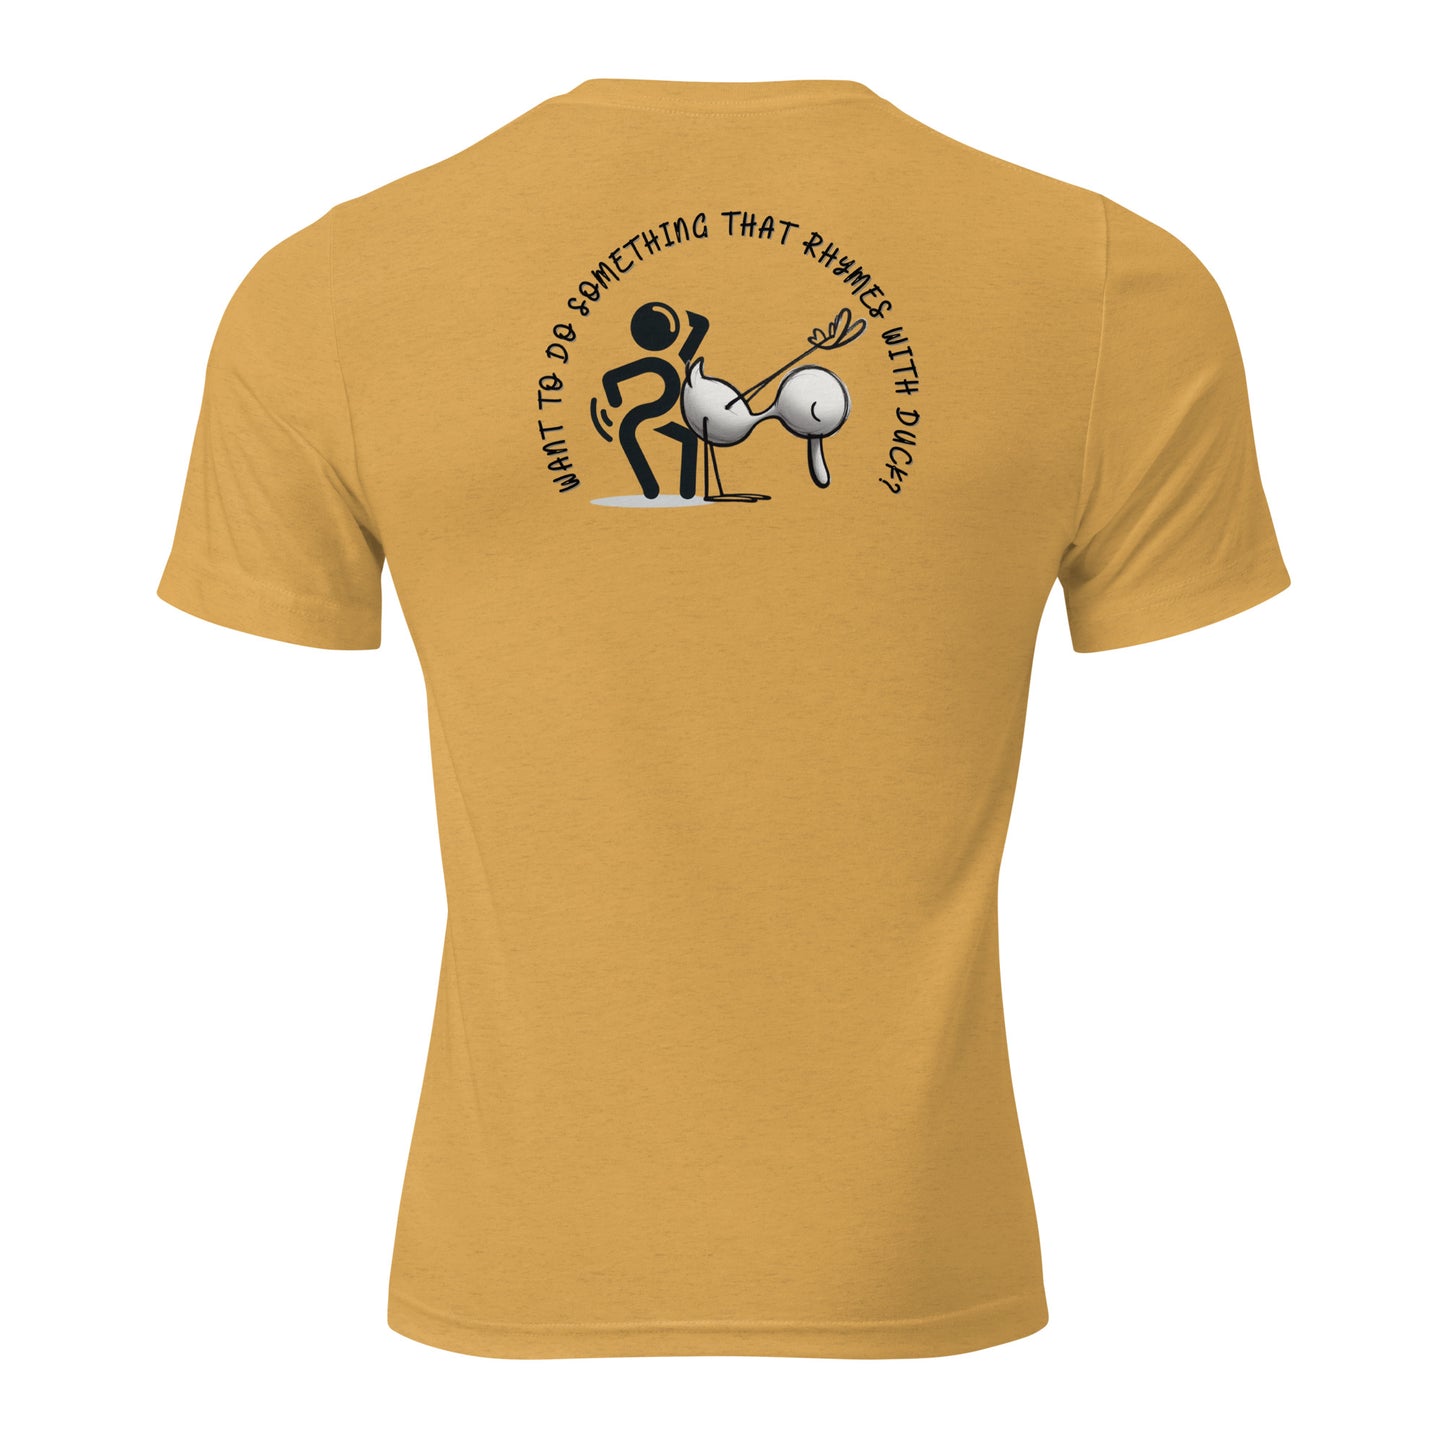 a yellow t - shirt with an image of a person holding a ball